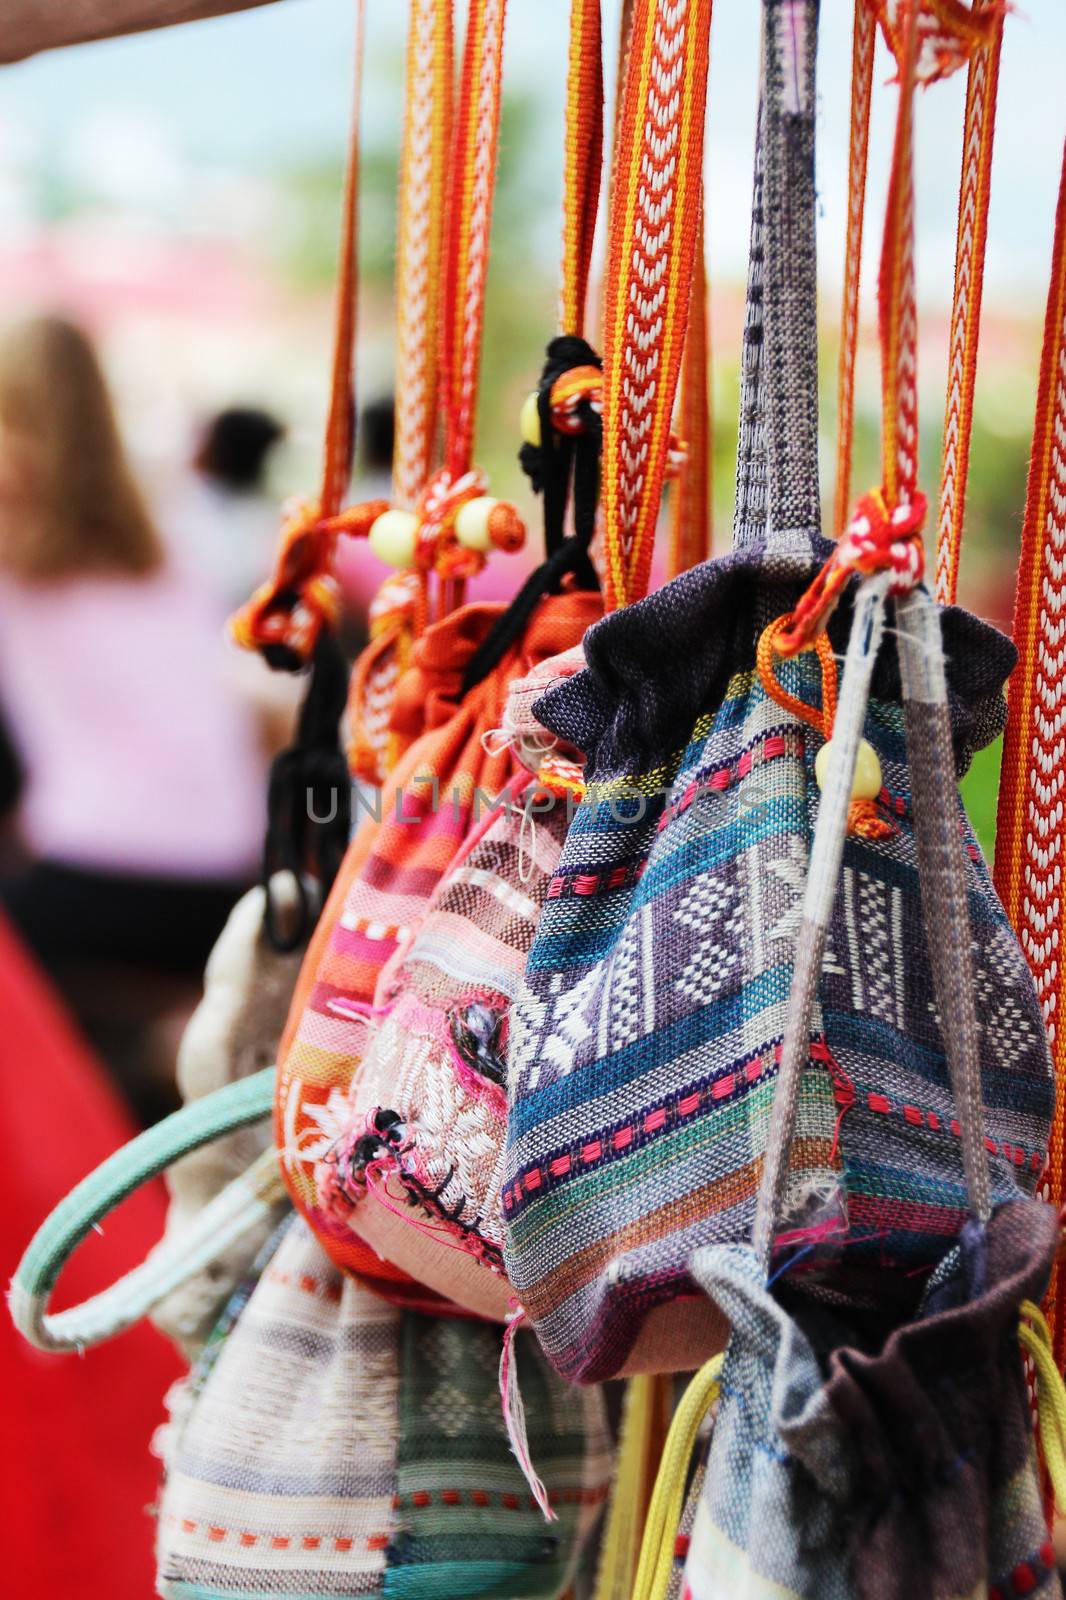 Hand-made colorful cotton bags from SaPa valley in Vietnam.